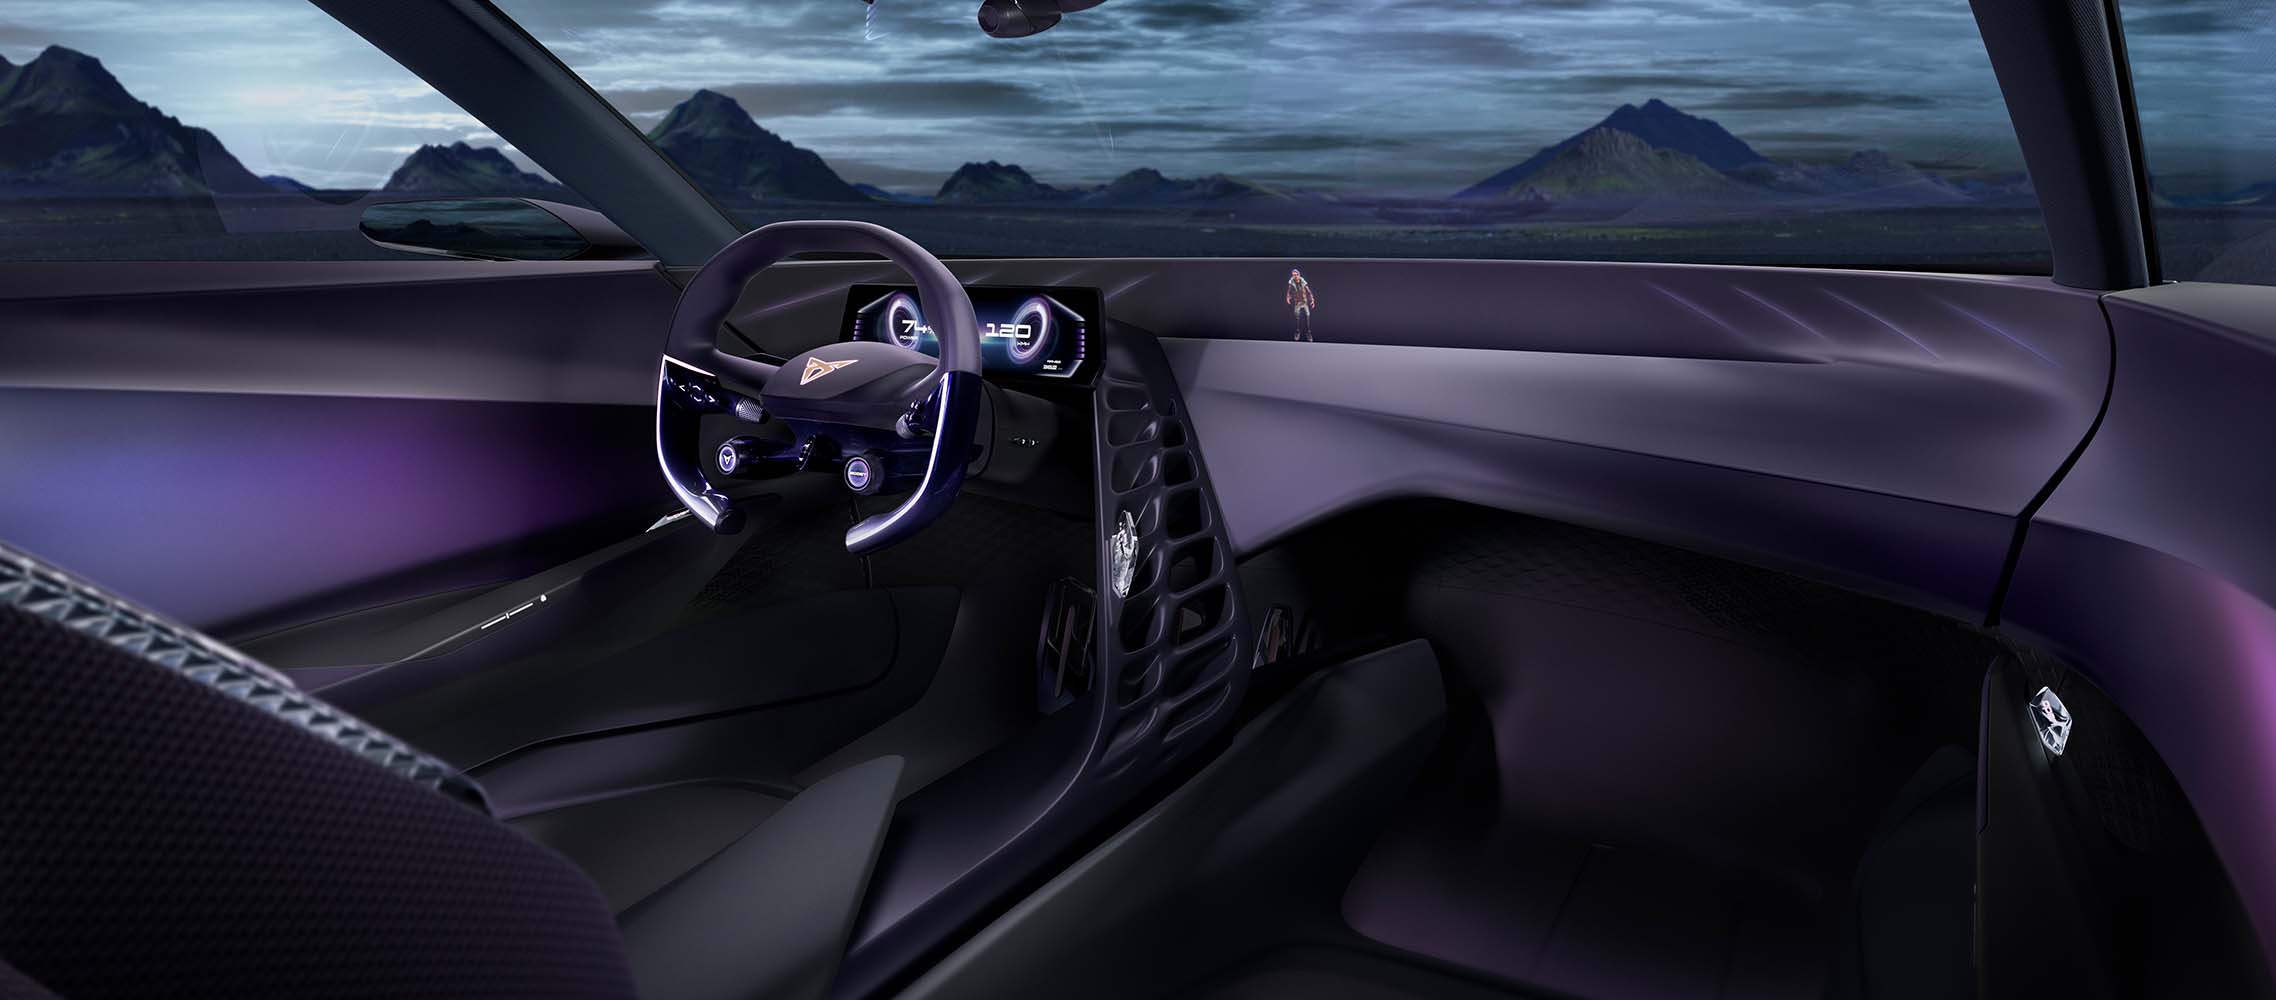 CUPRA Dark Rebel’s interior and dashboard with infotainment system, a metahype avatar and purple ambient lighting.